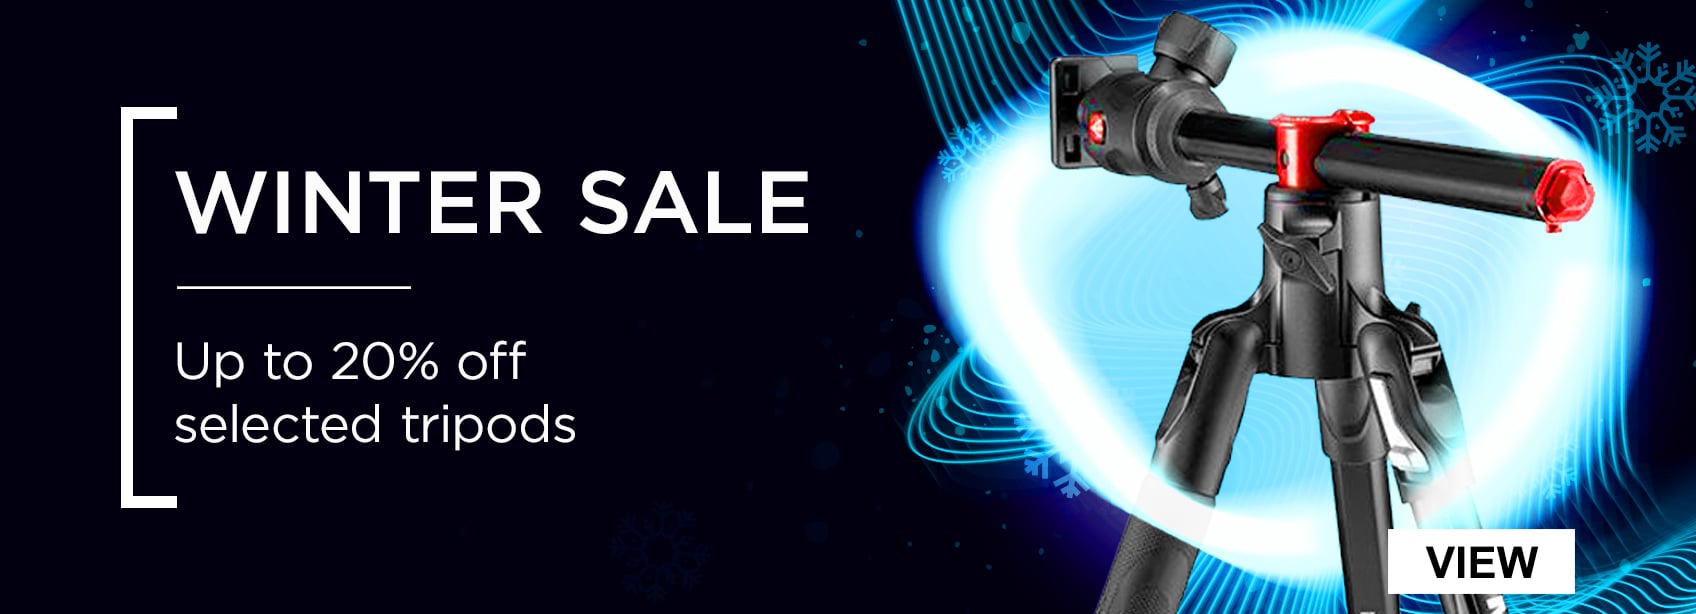 WINTER SALE - Up to 20% off selected tripods